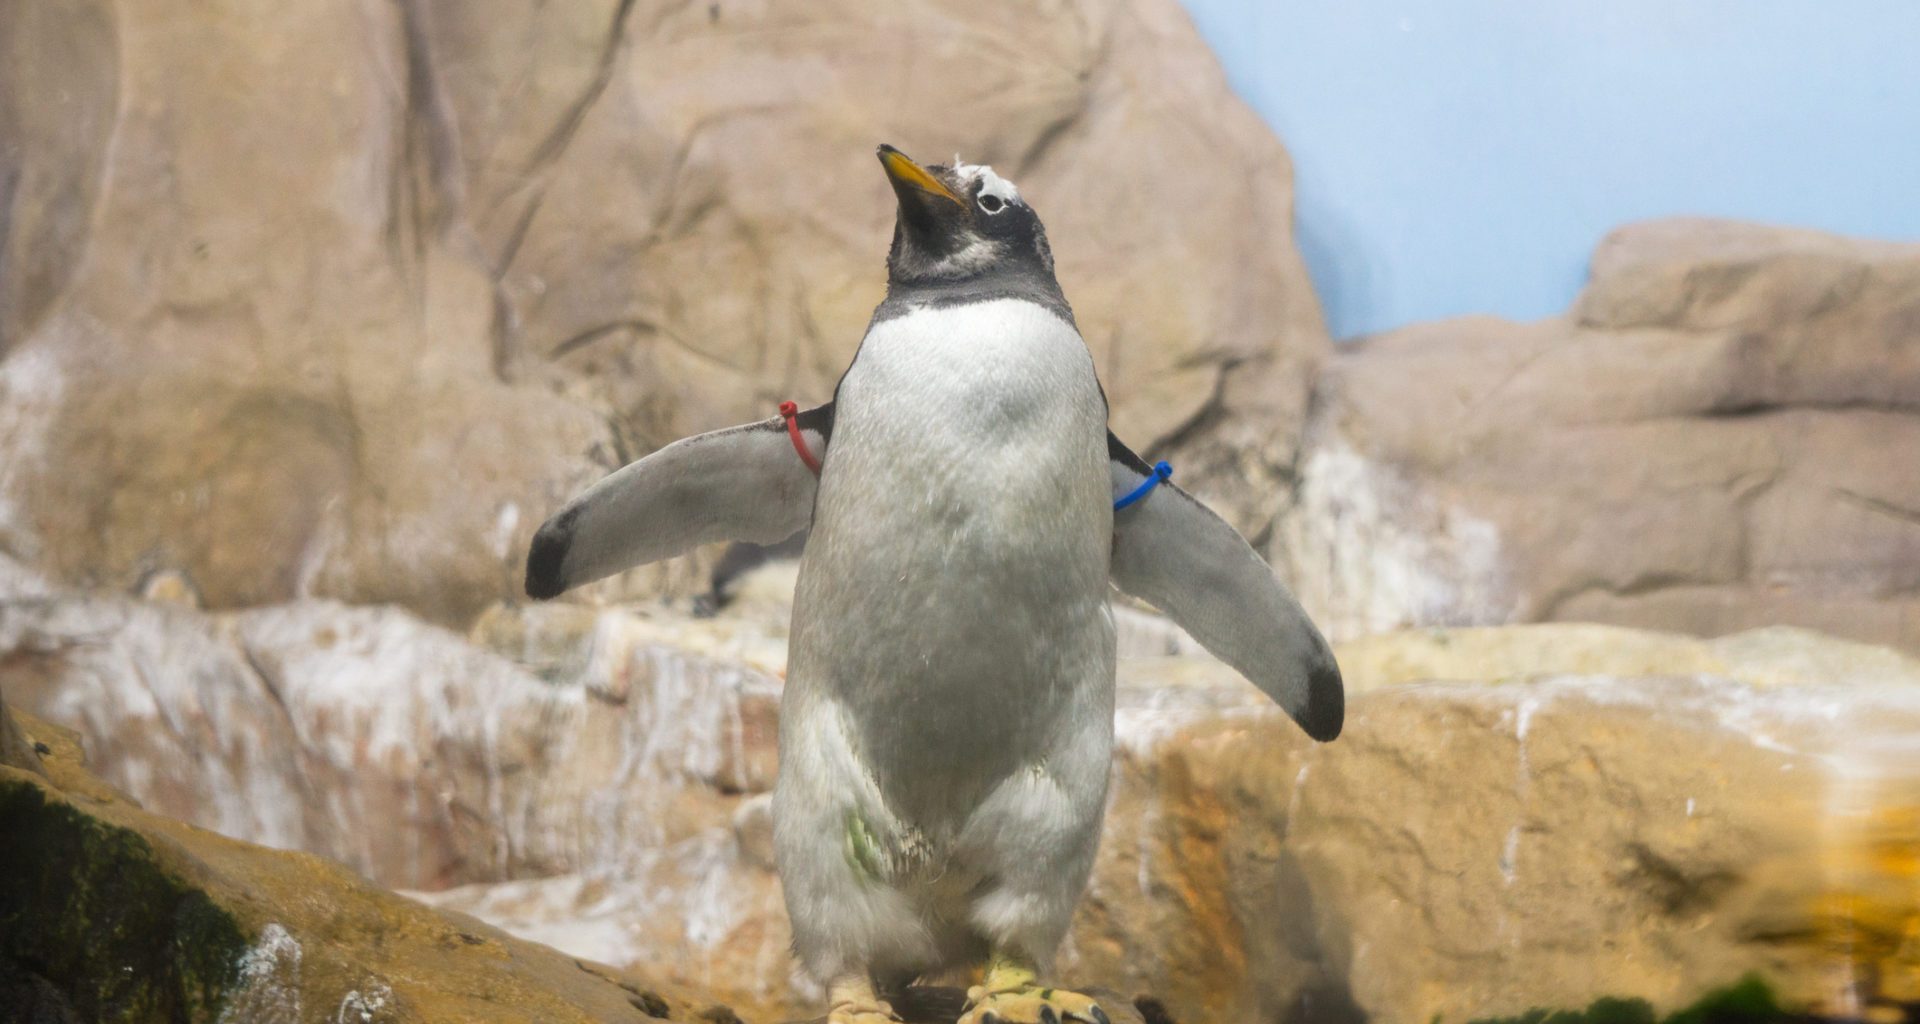 Claim Edinburgh Zoo employs penguin erector after planes fly over is FFS 4